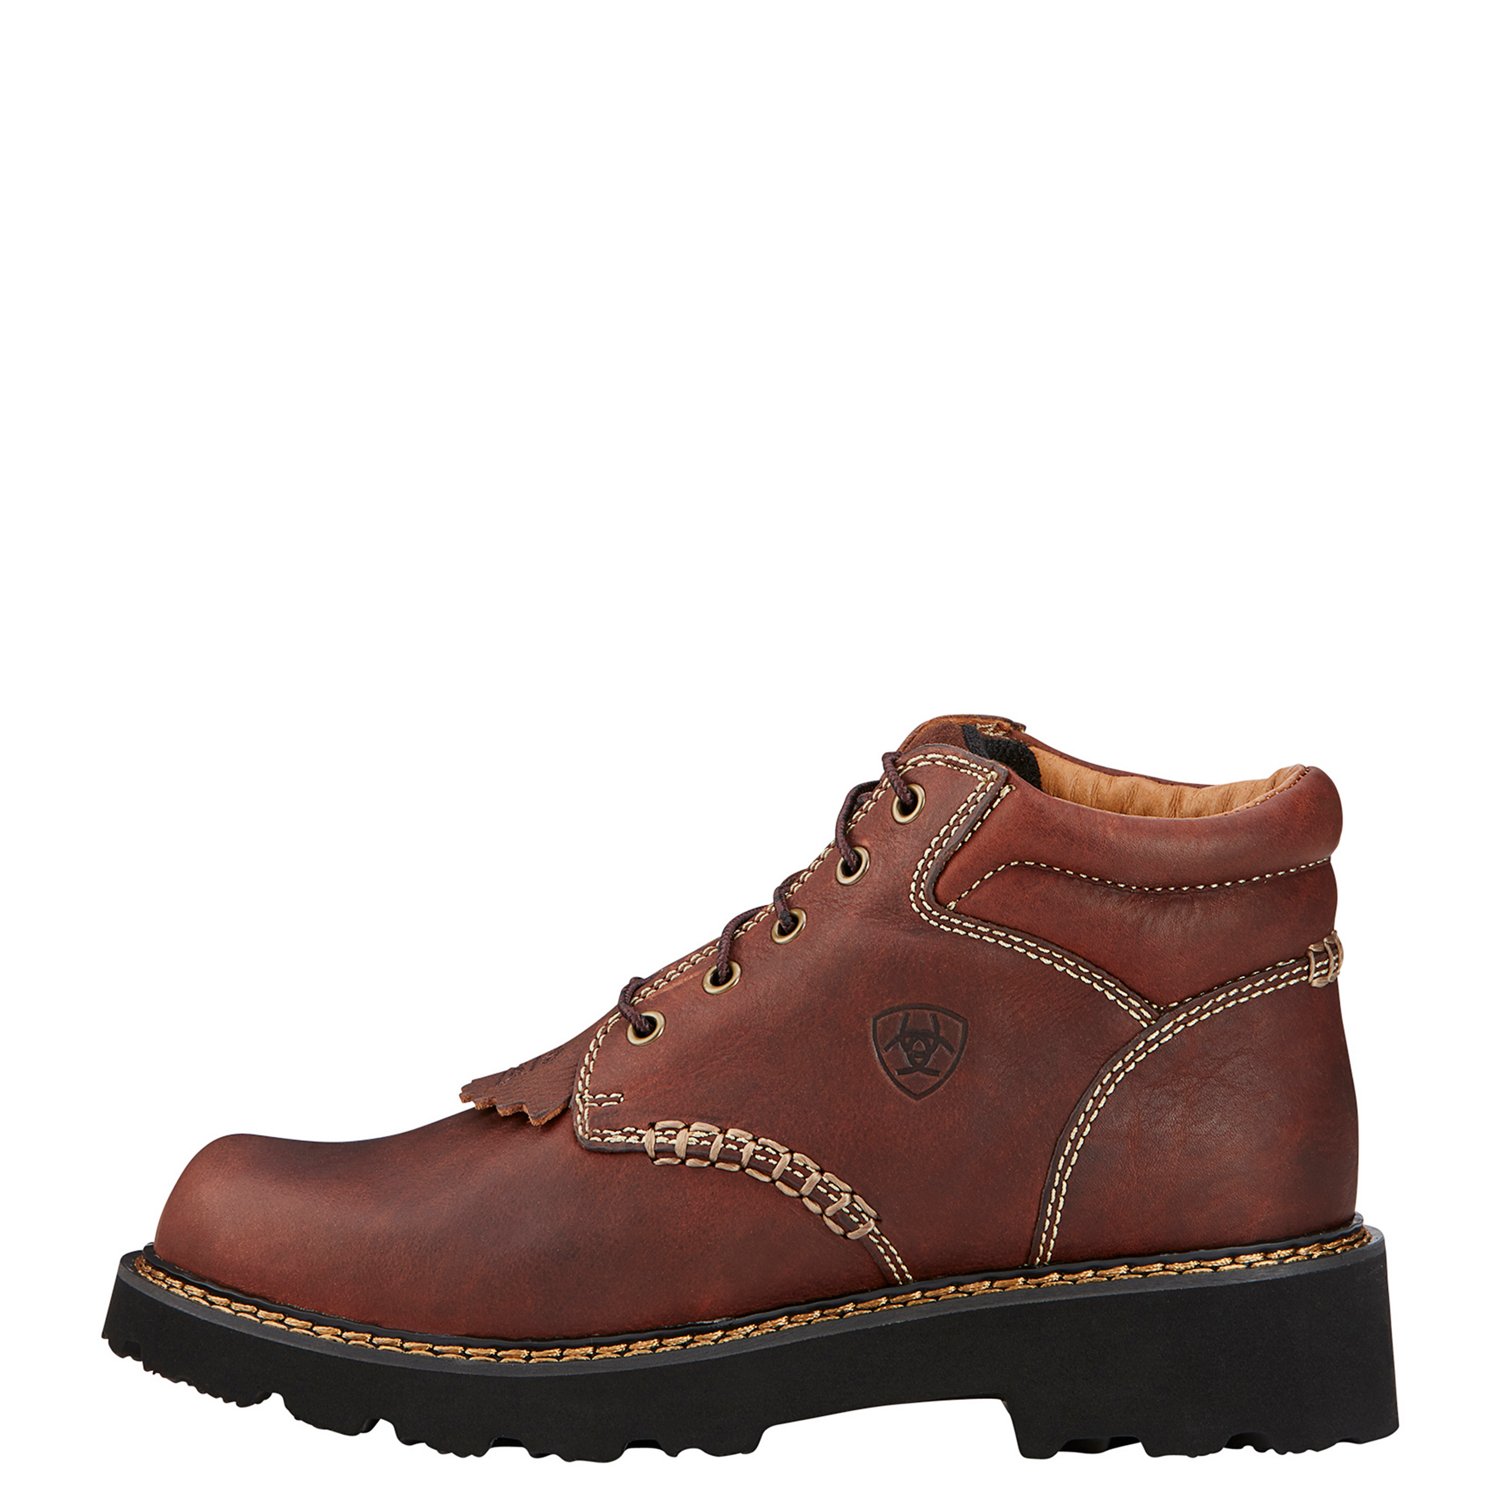 Ariat Women's Canyon Boots | Free Shipping at Academy